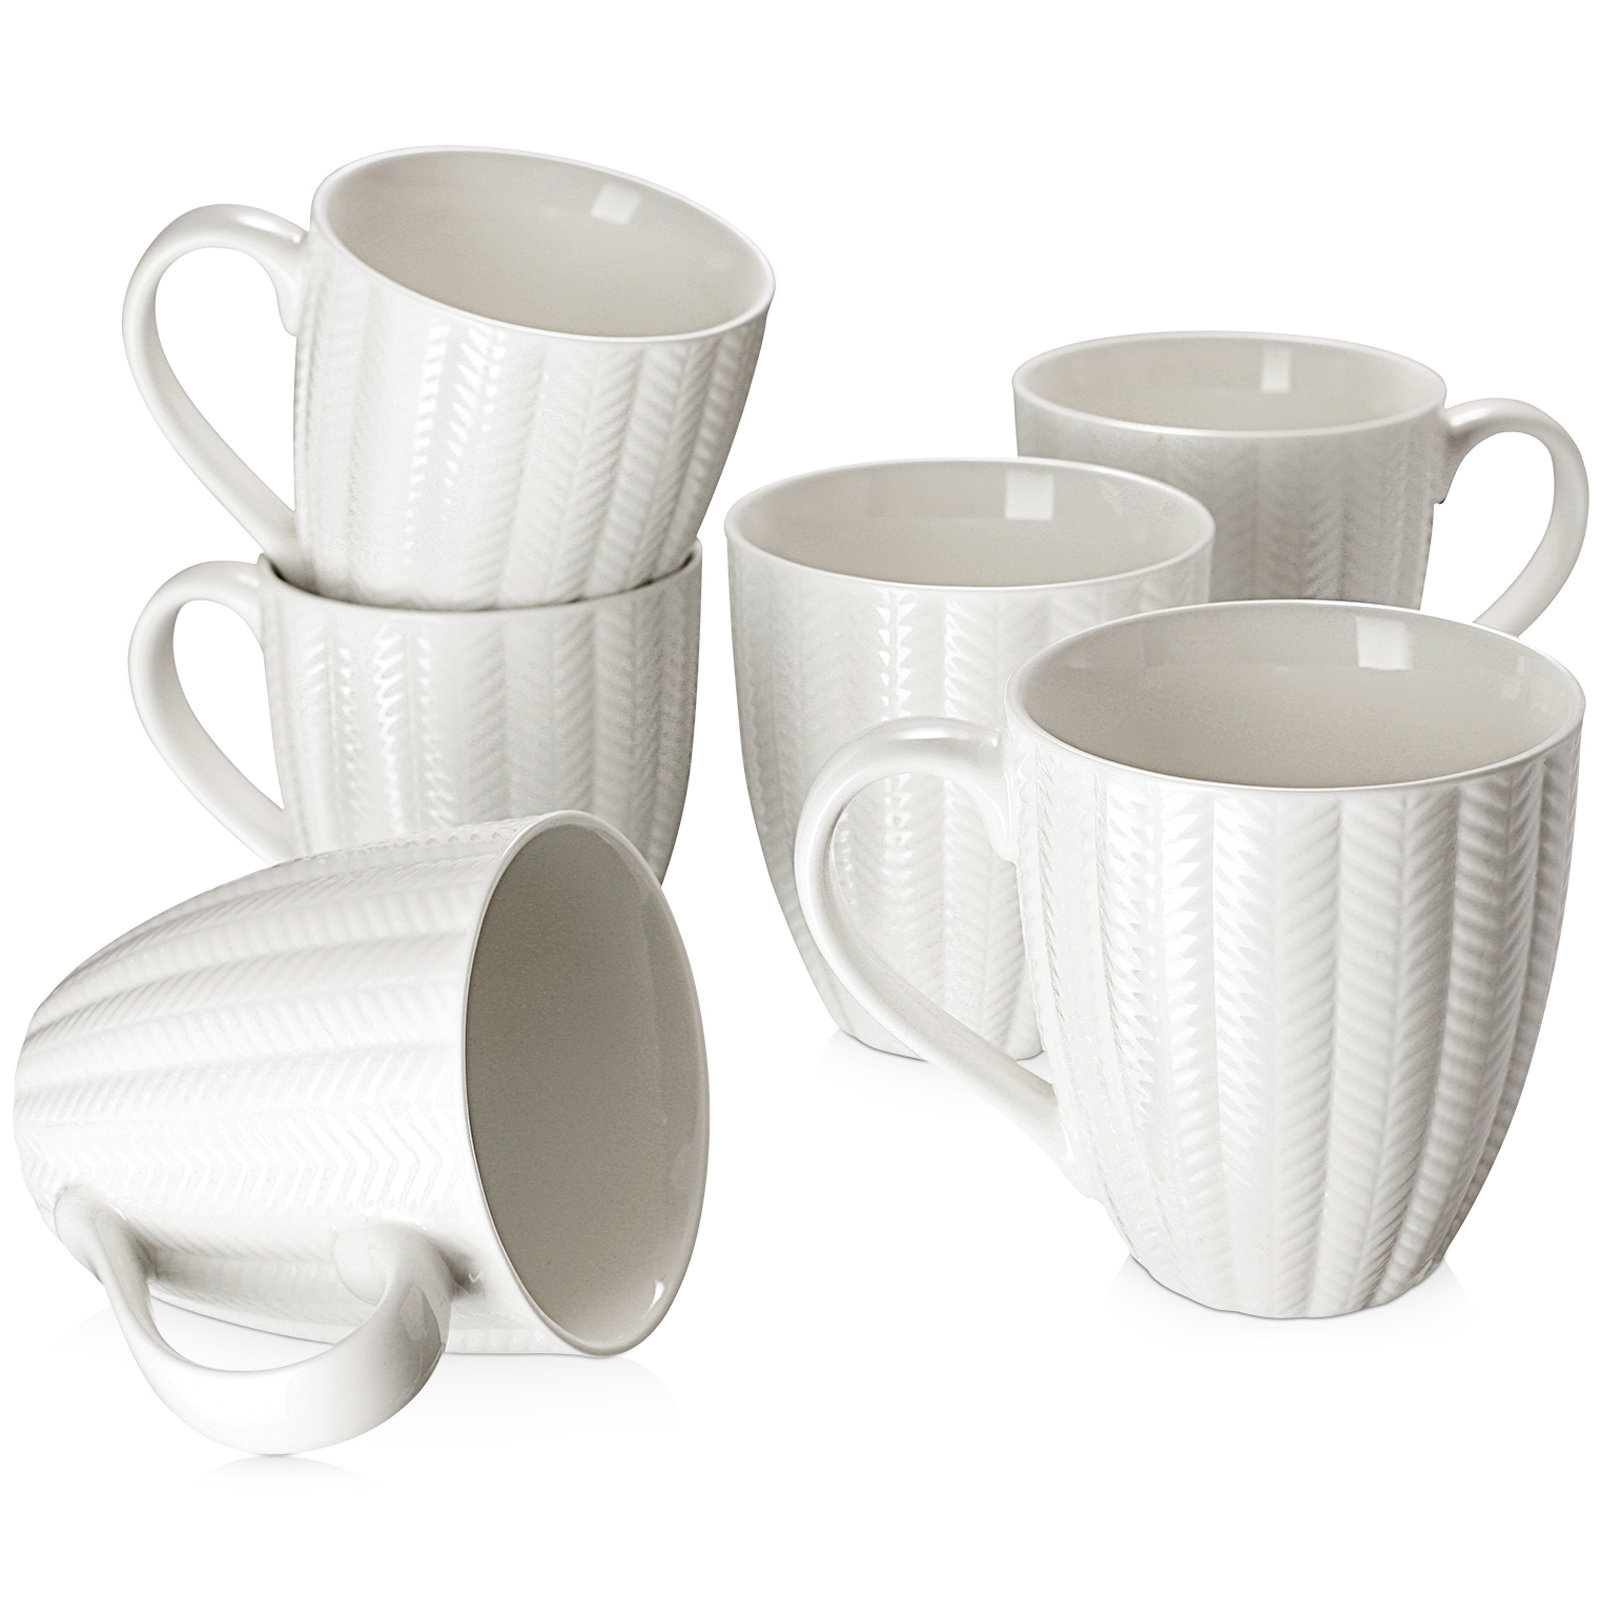 LIFVER 20 oz Coffee Mugs Set of 4, Speckled Big White Mugs with Large  Handles for